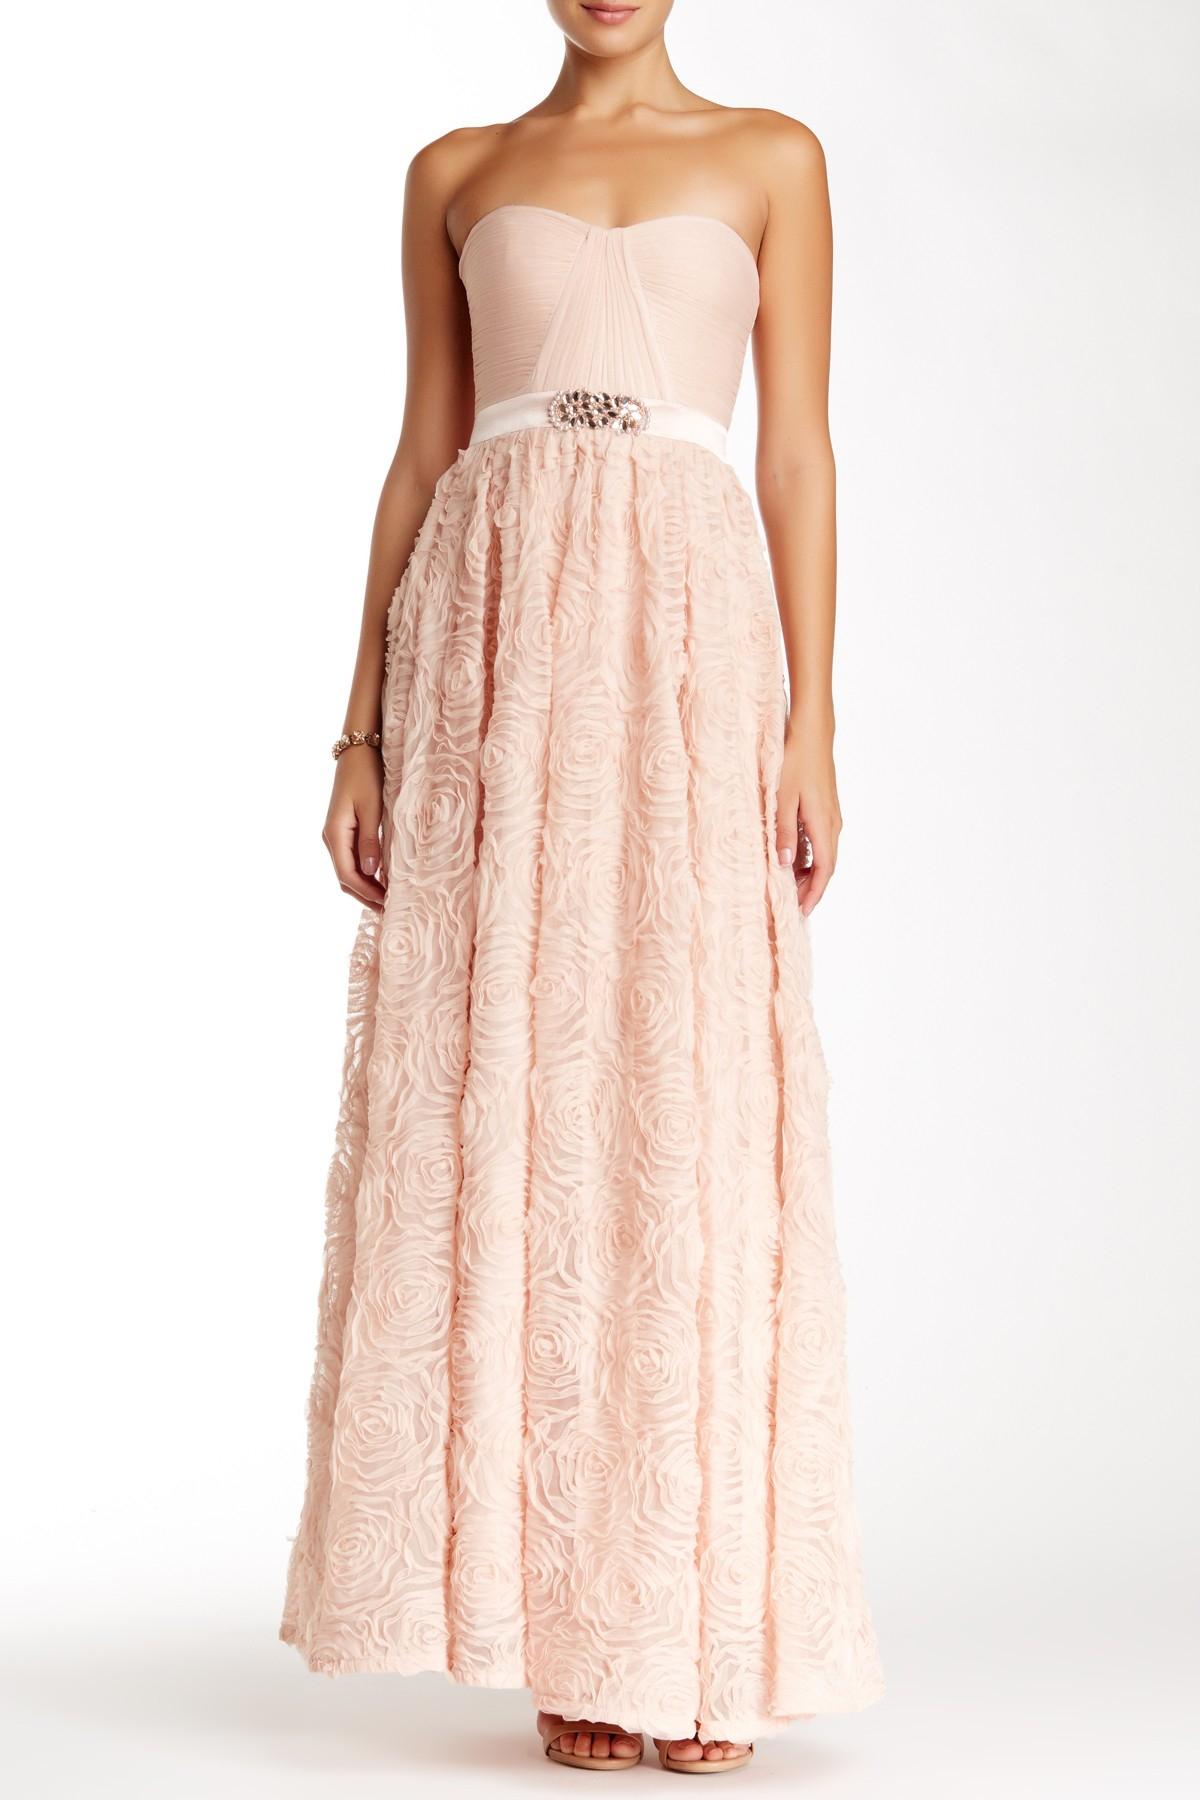 Adrianna Papell Strapless Lace Dress in Blush (Pink) - Lyst